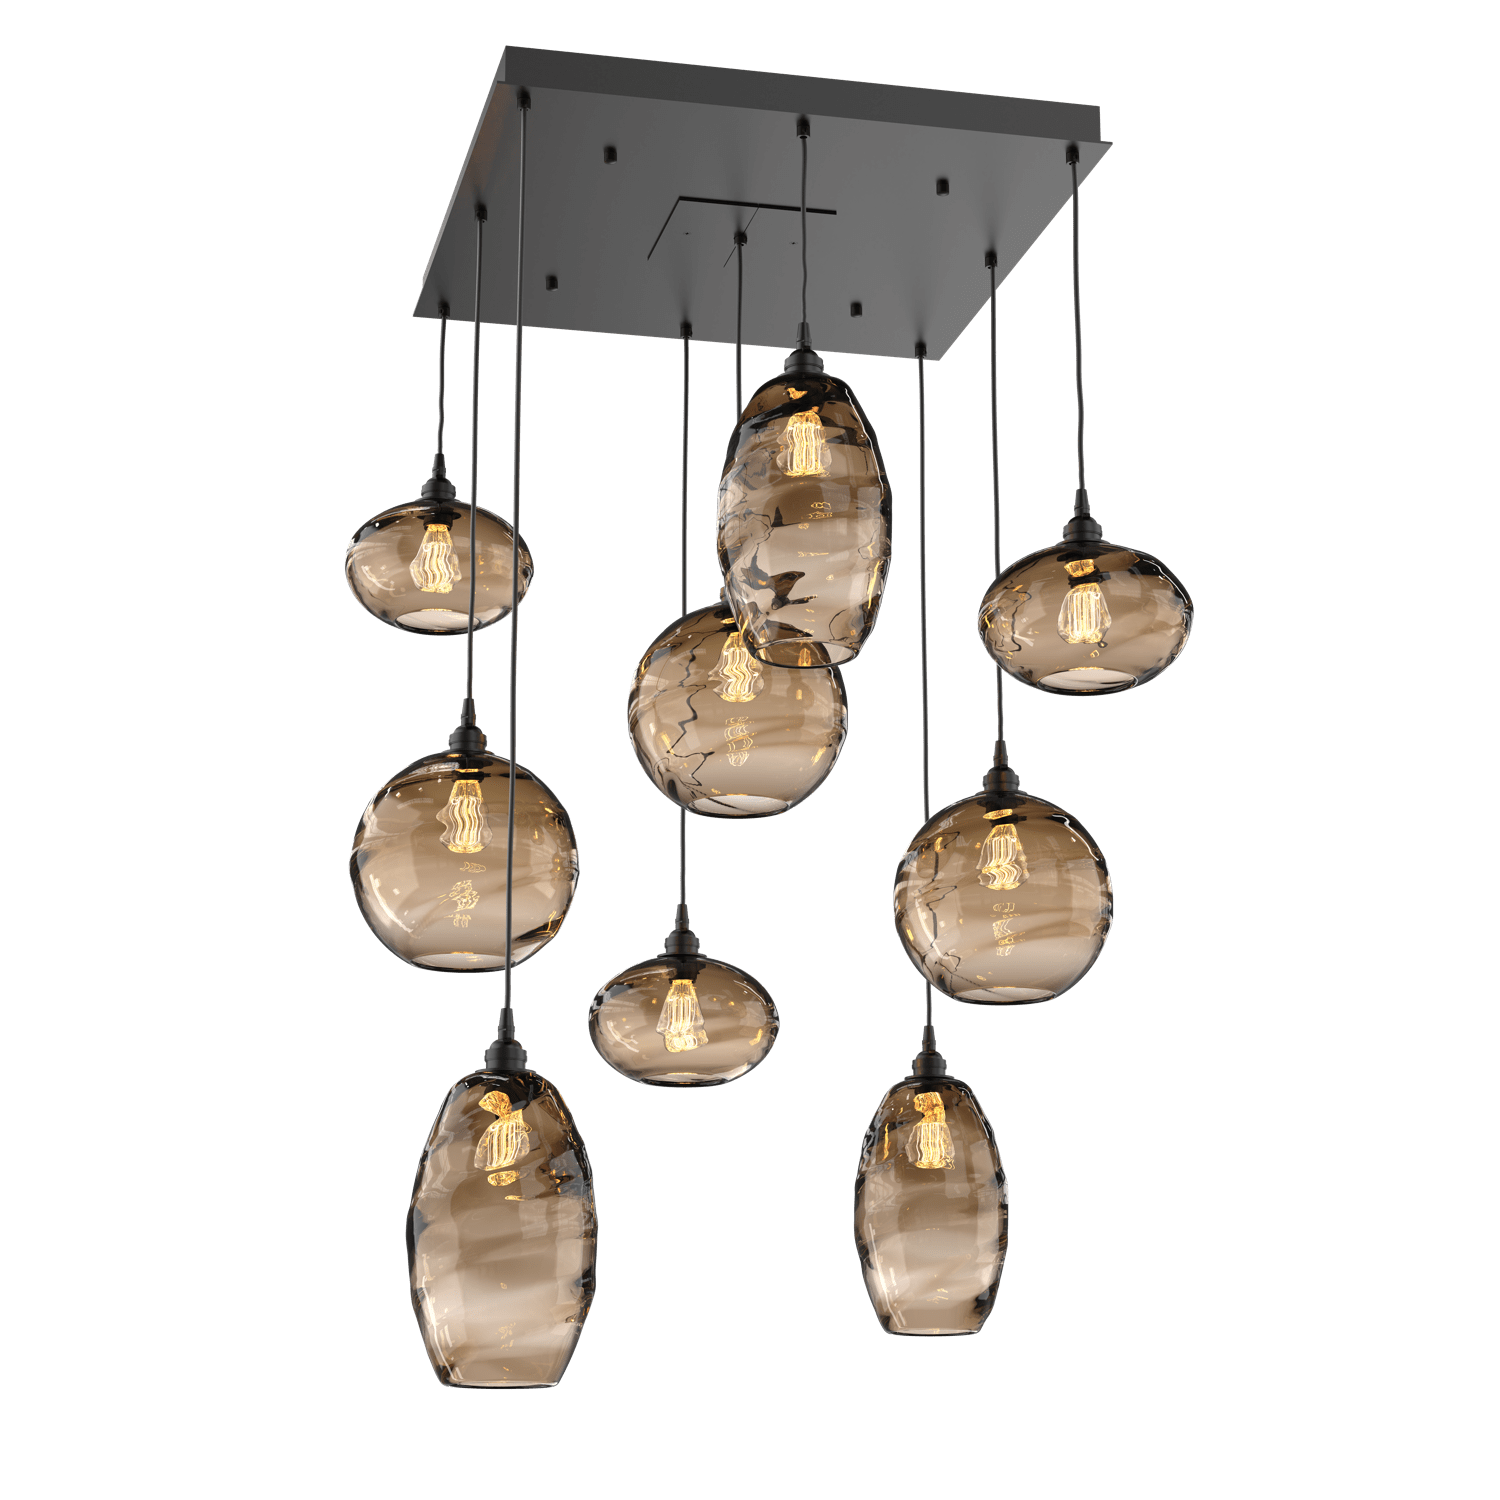 CHB0048-09-MB-OB-Hammerton-Studio-Optic-Blown-Glass-Misto-9-light-square-pendant-chandelier-with-matte-black-finish-and-optic-bronze-blown-glass-shades-and-incandescent-lamping